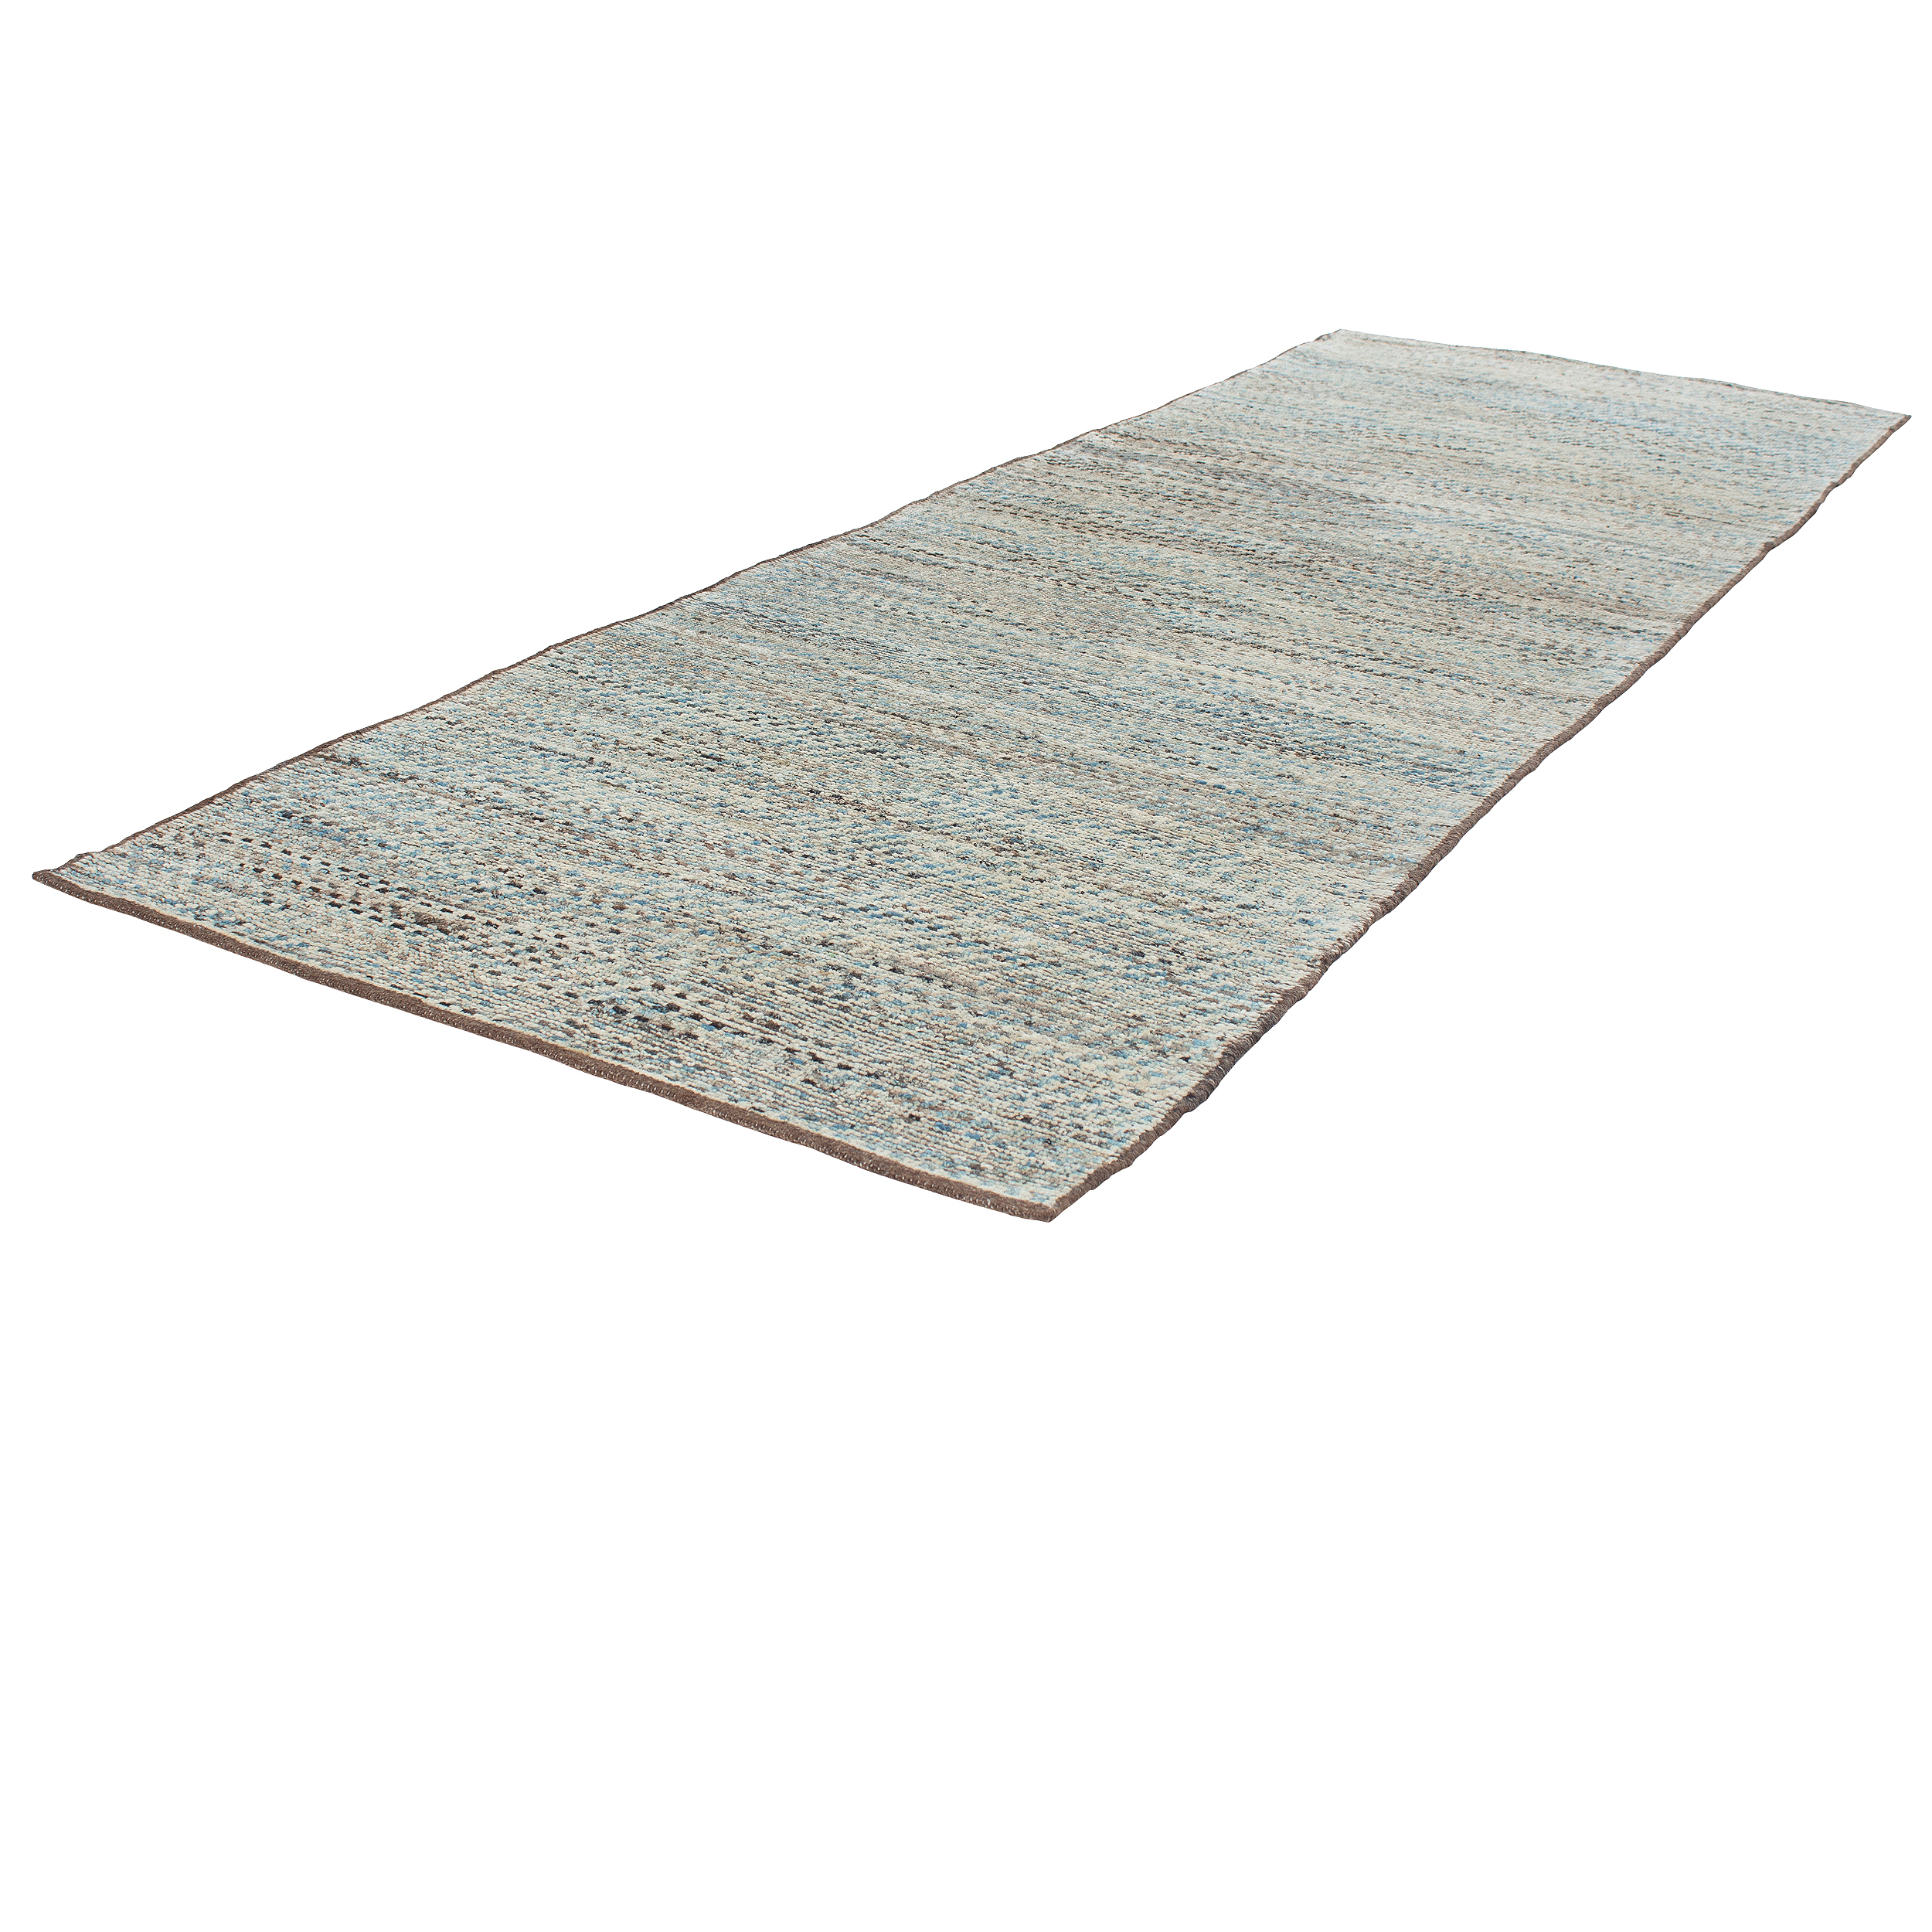 Amazon rug is handknotted from the finest hand-carded, hand-spun, naturally dyed wool.